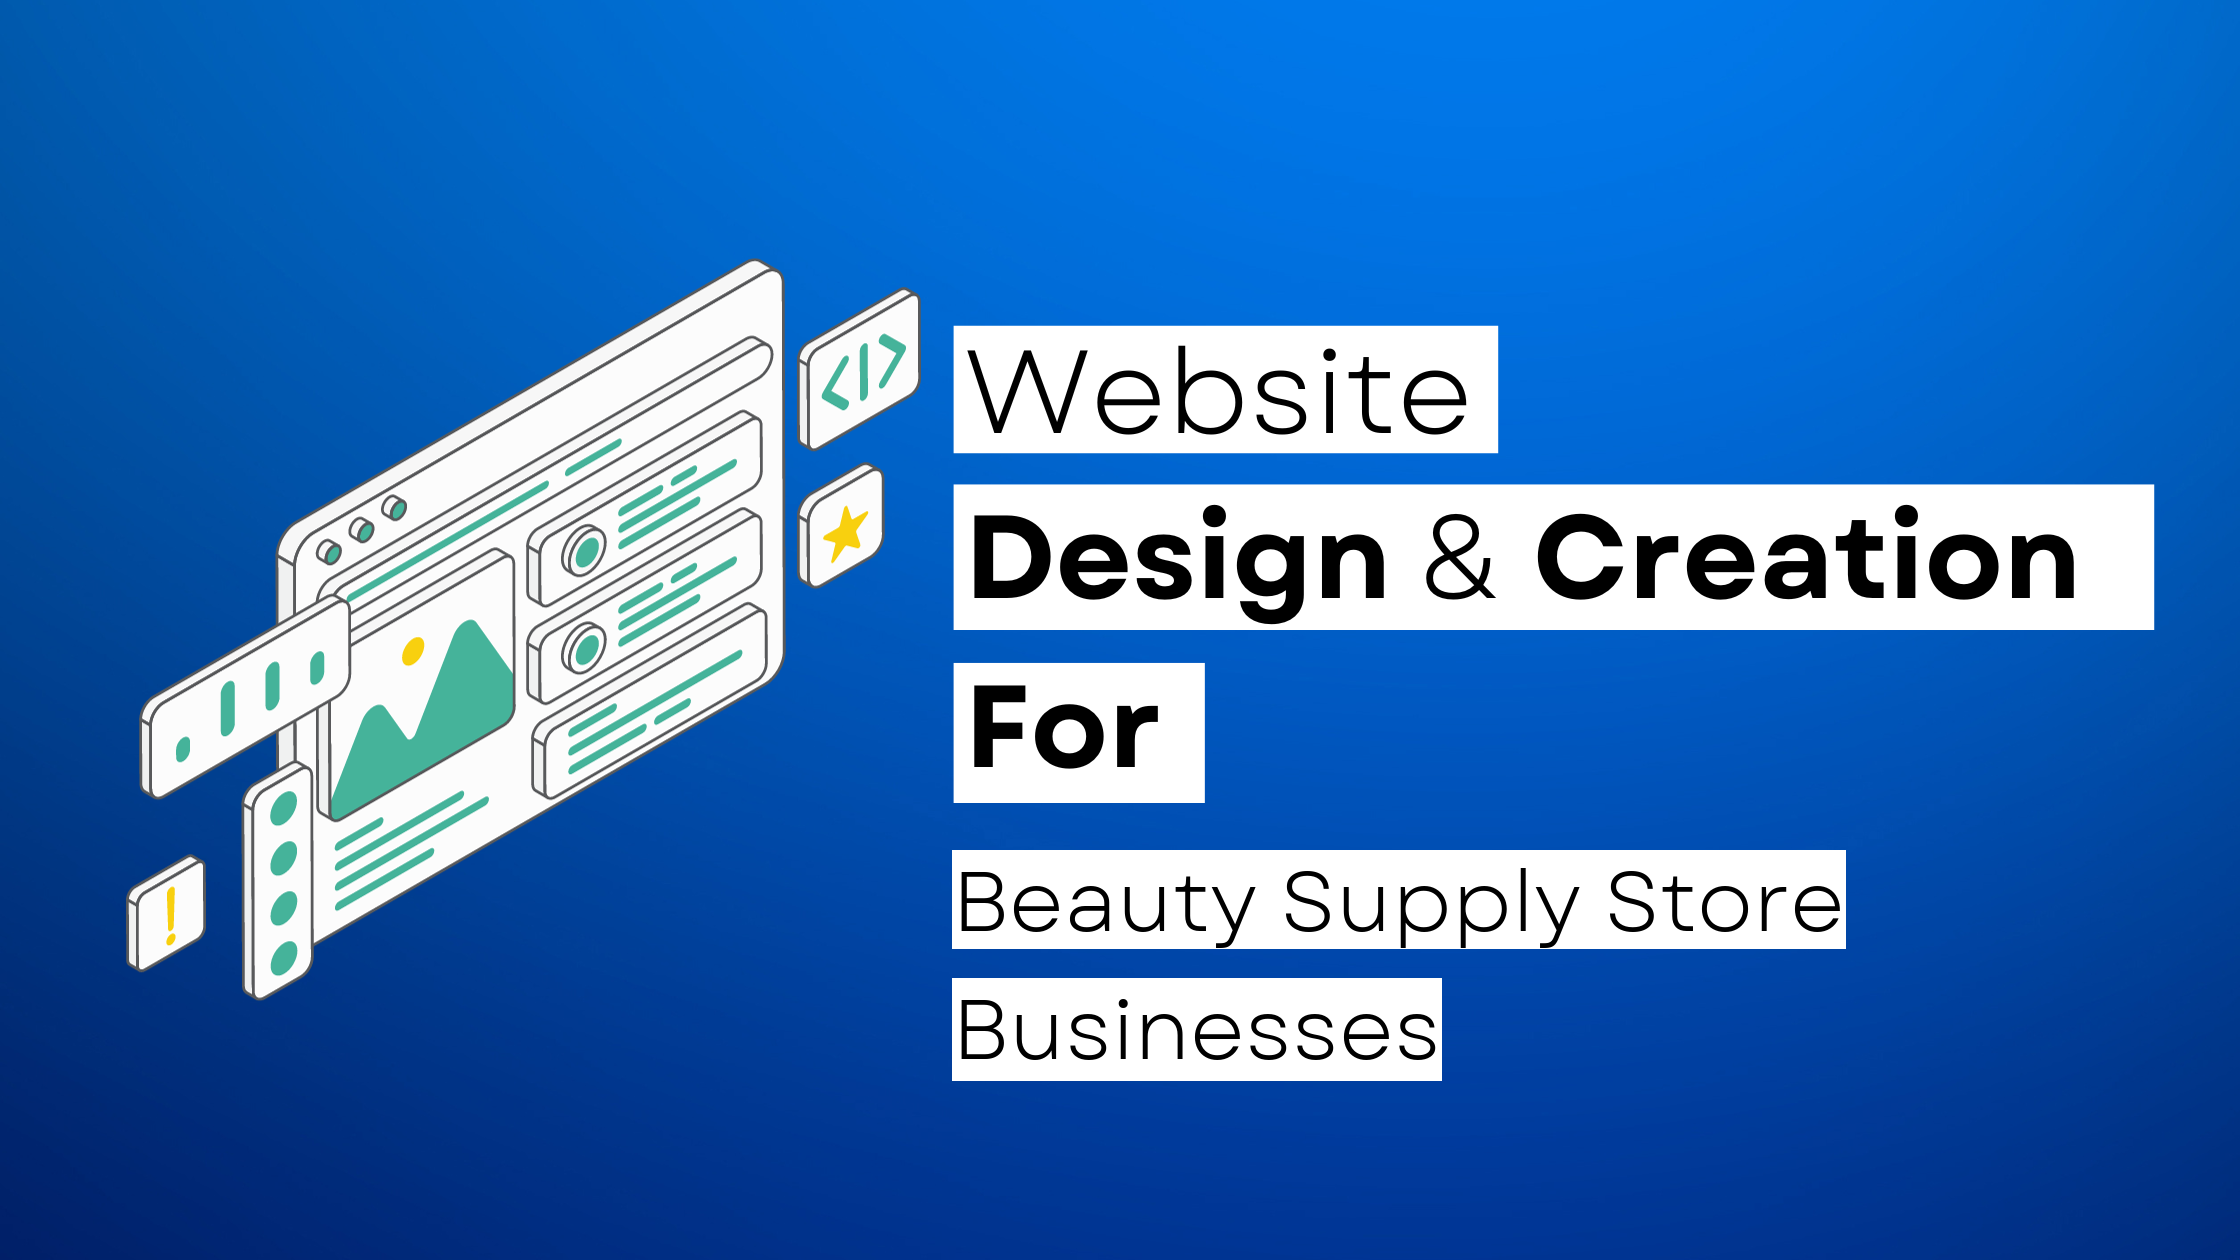 How to start a Beauty Supply Store website